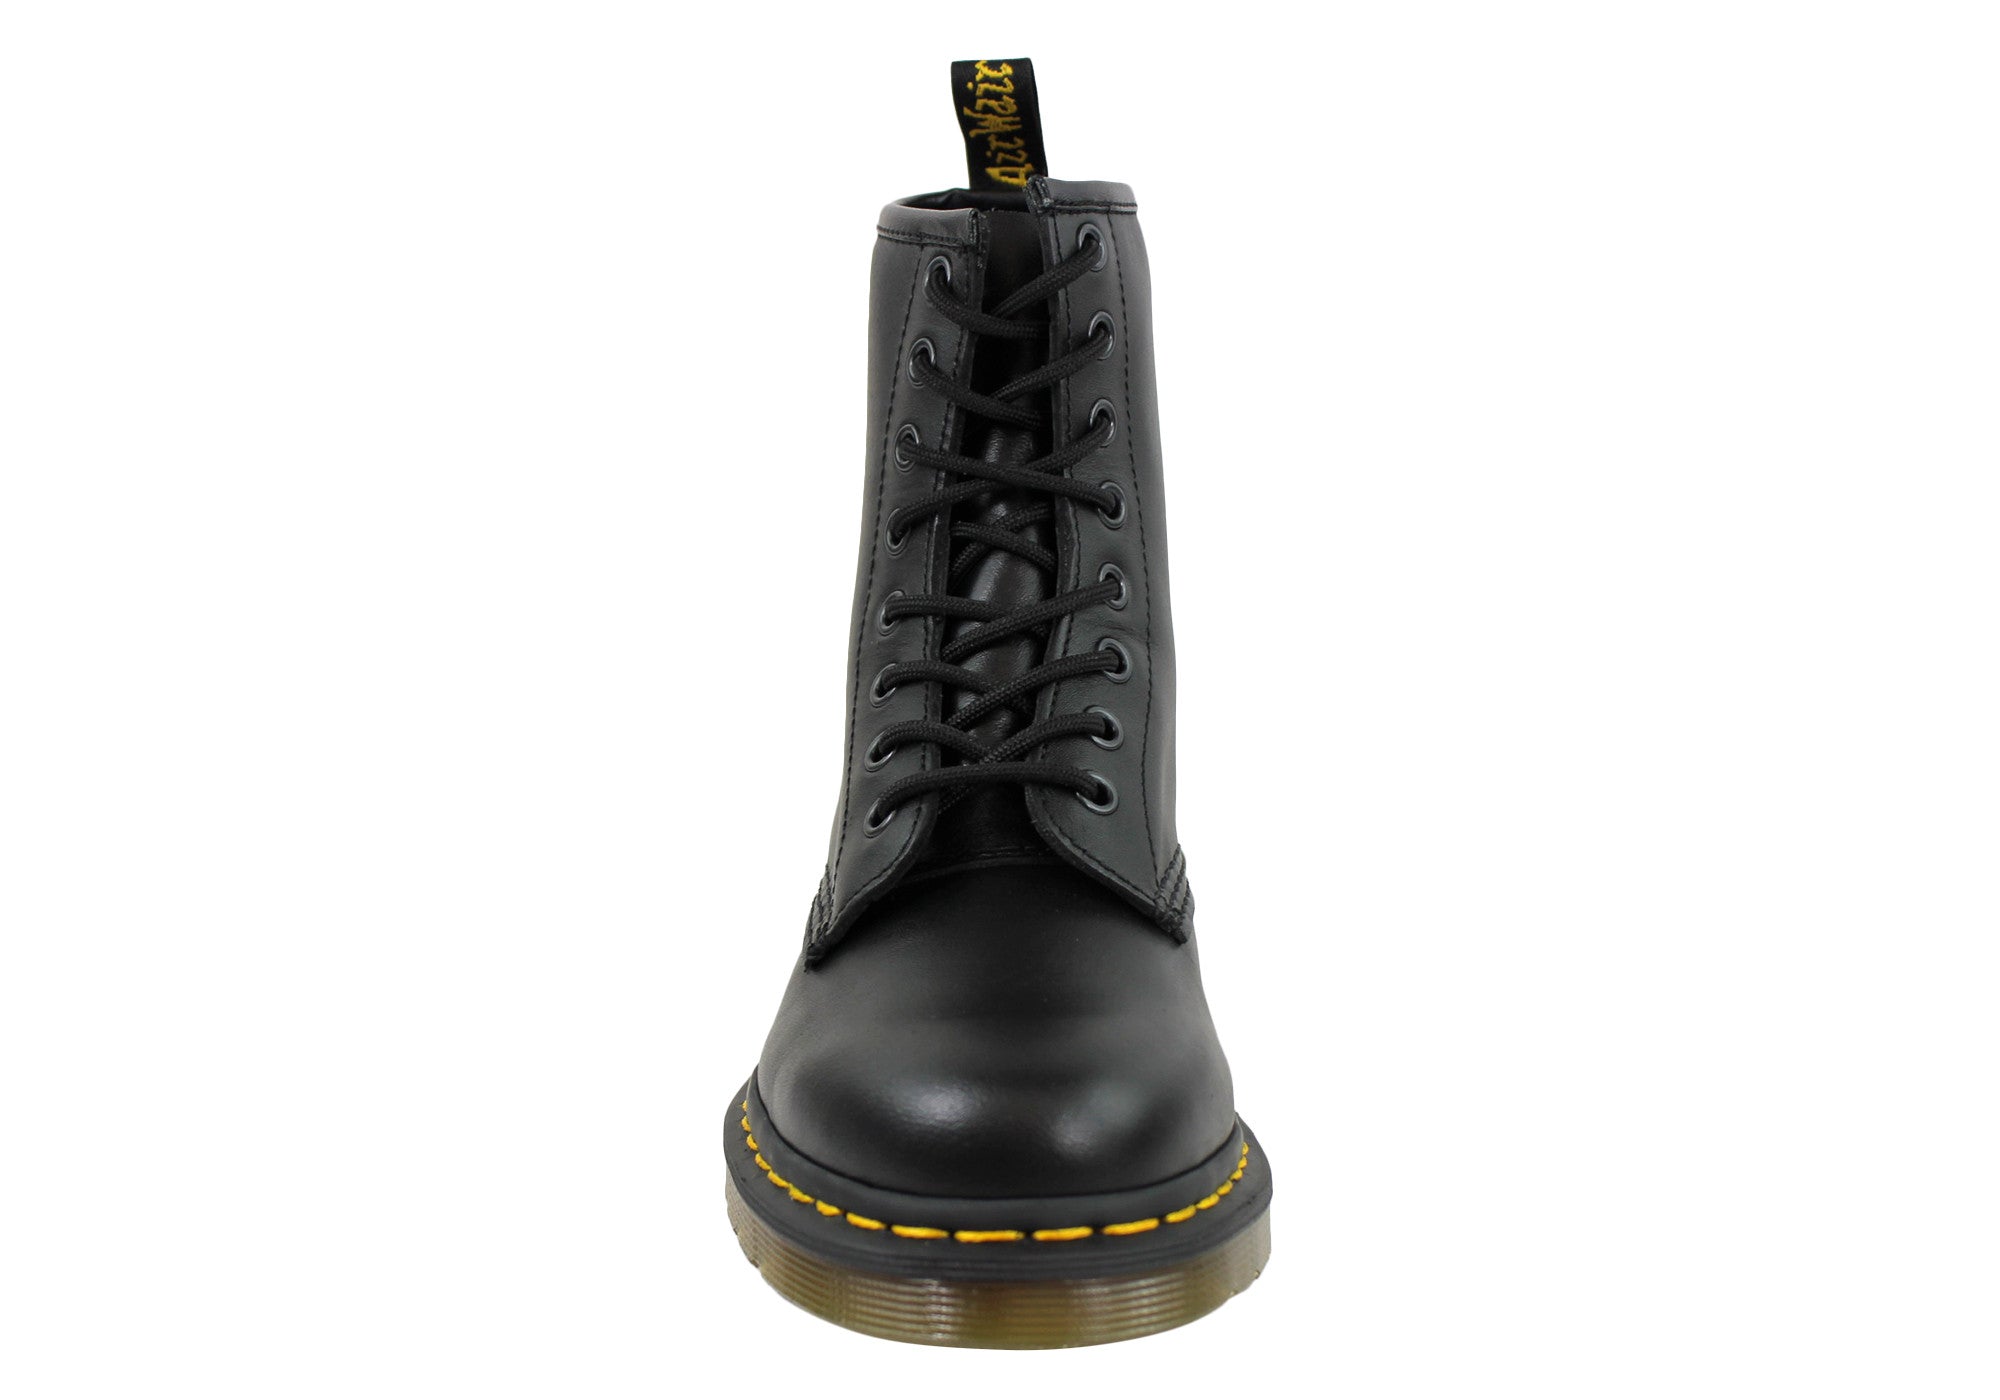 Dr Martens 1460 Black Nappa Leather Lace Up Comfortable Unisex Boots